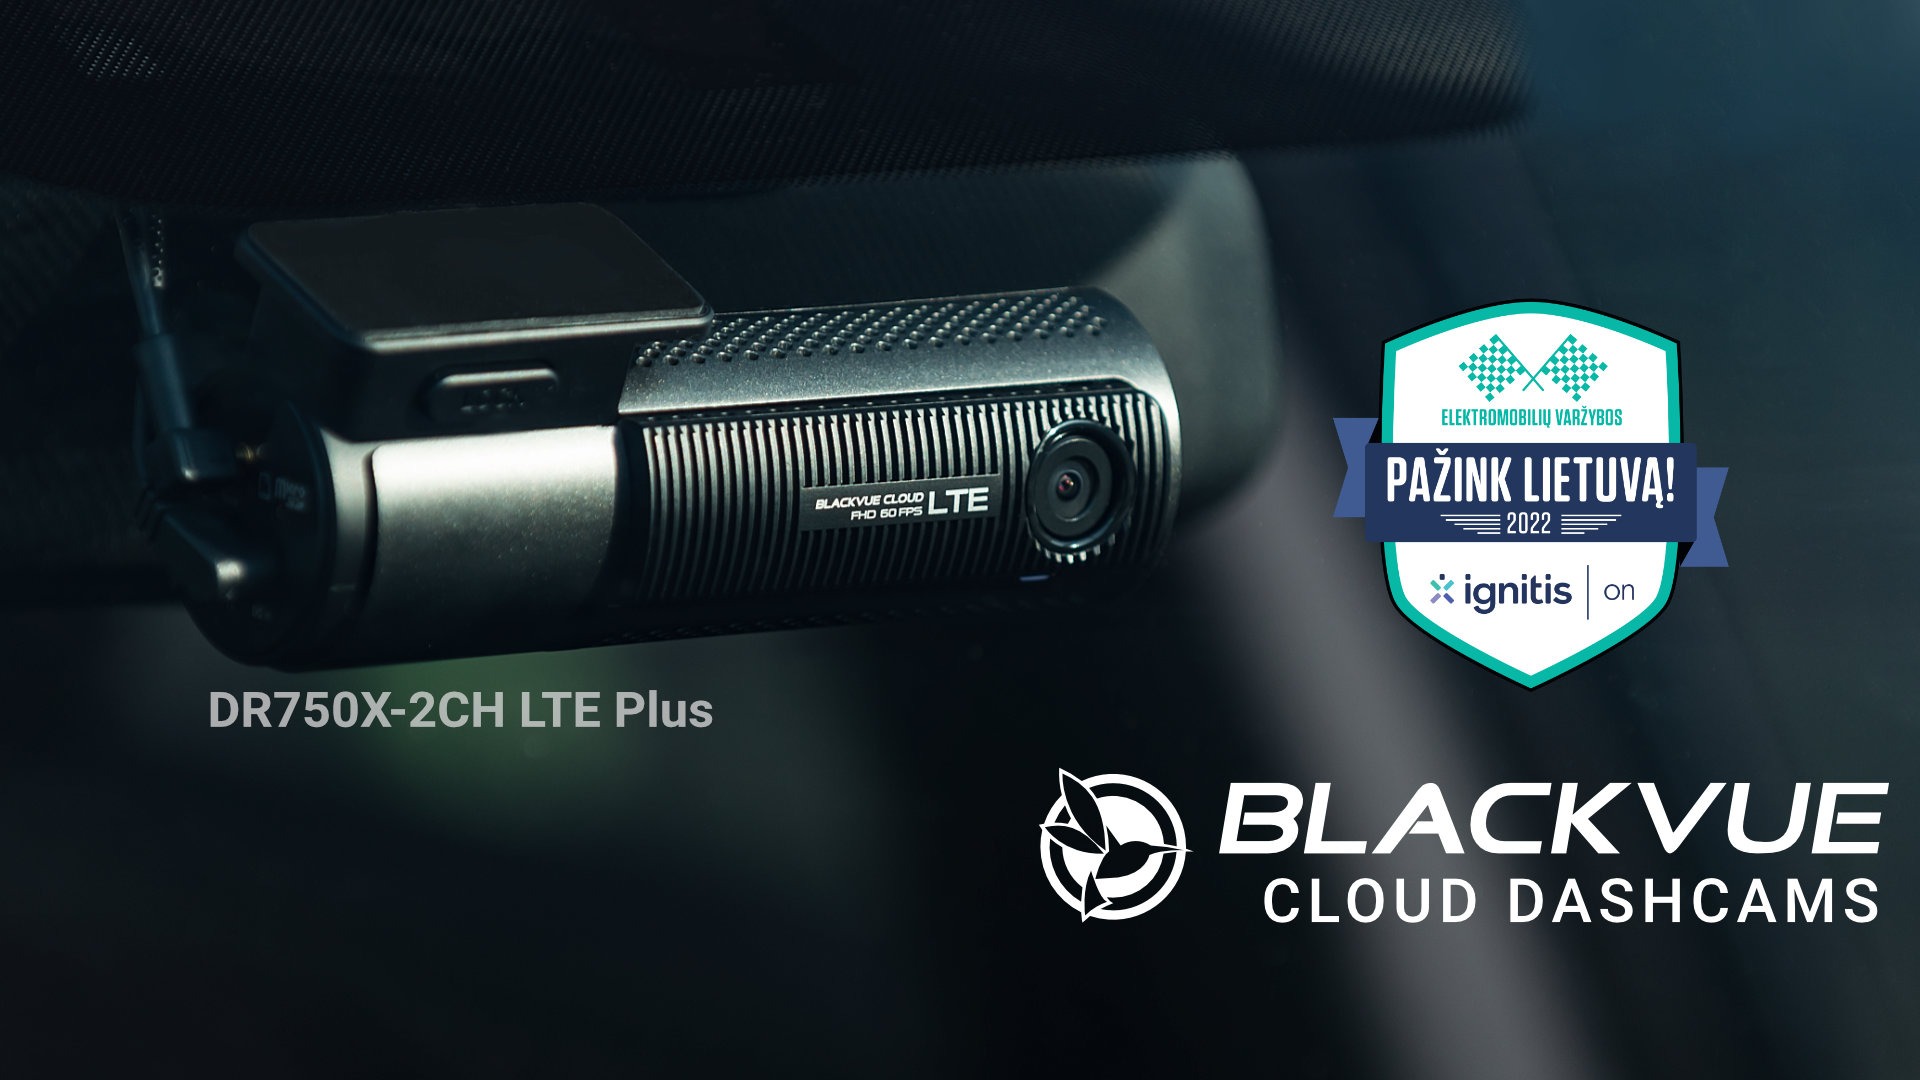 BlackVue Sponsors “Ignitis ON: Discover Lithuania” Electric Vehicle Race